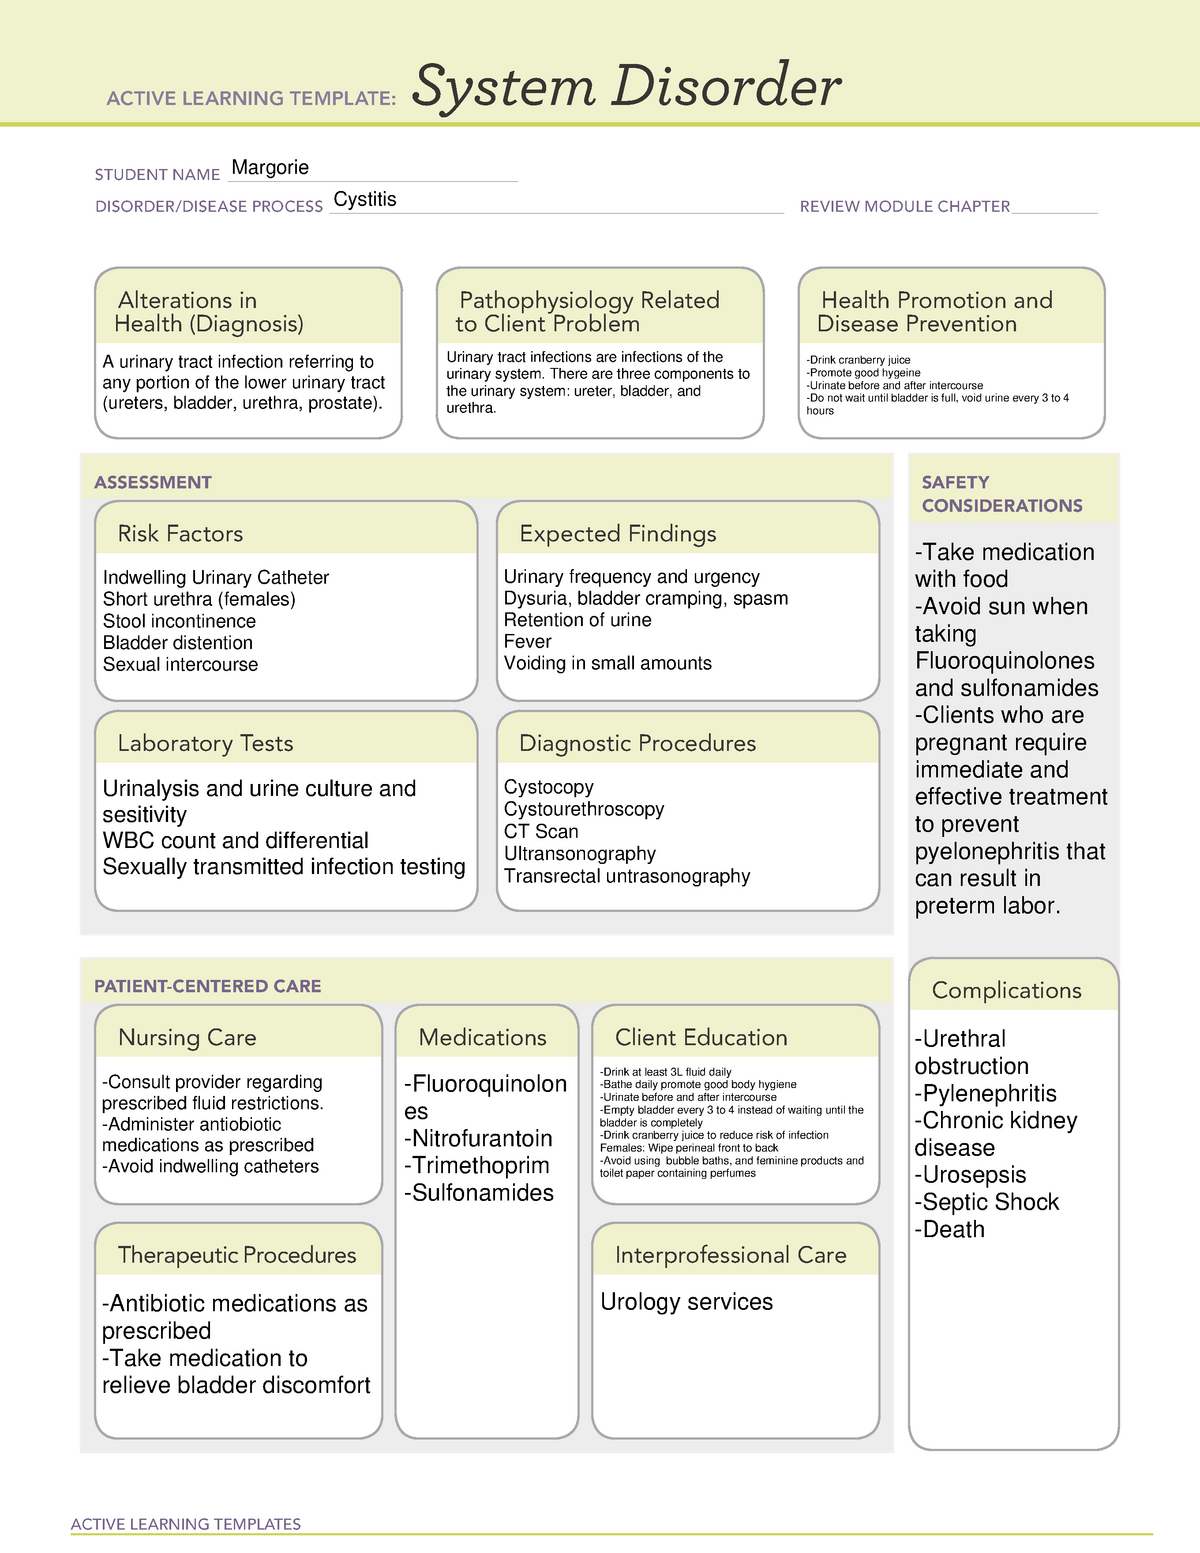 ati-system-disorder-cystitis-template-active-learning-templates